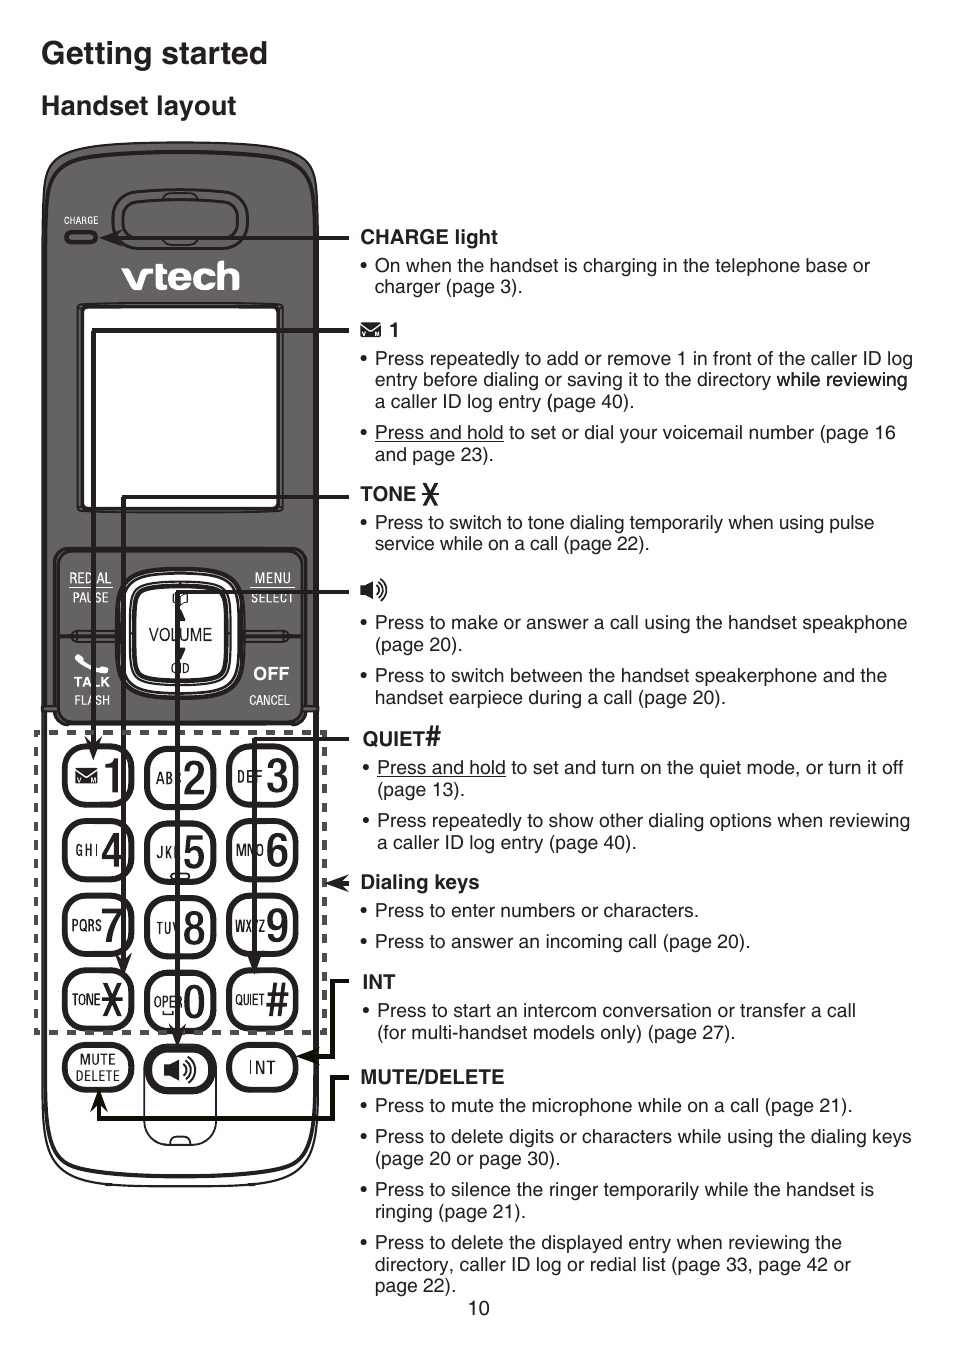 Getting started, Handset layout | VTech CS6829 Manual User Manual | Page 14 / 84